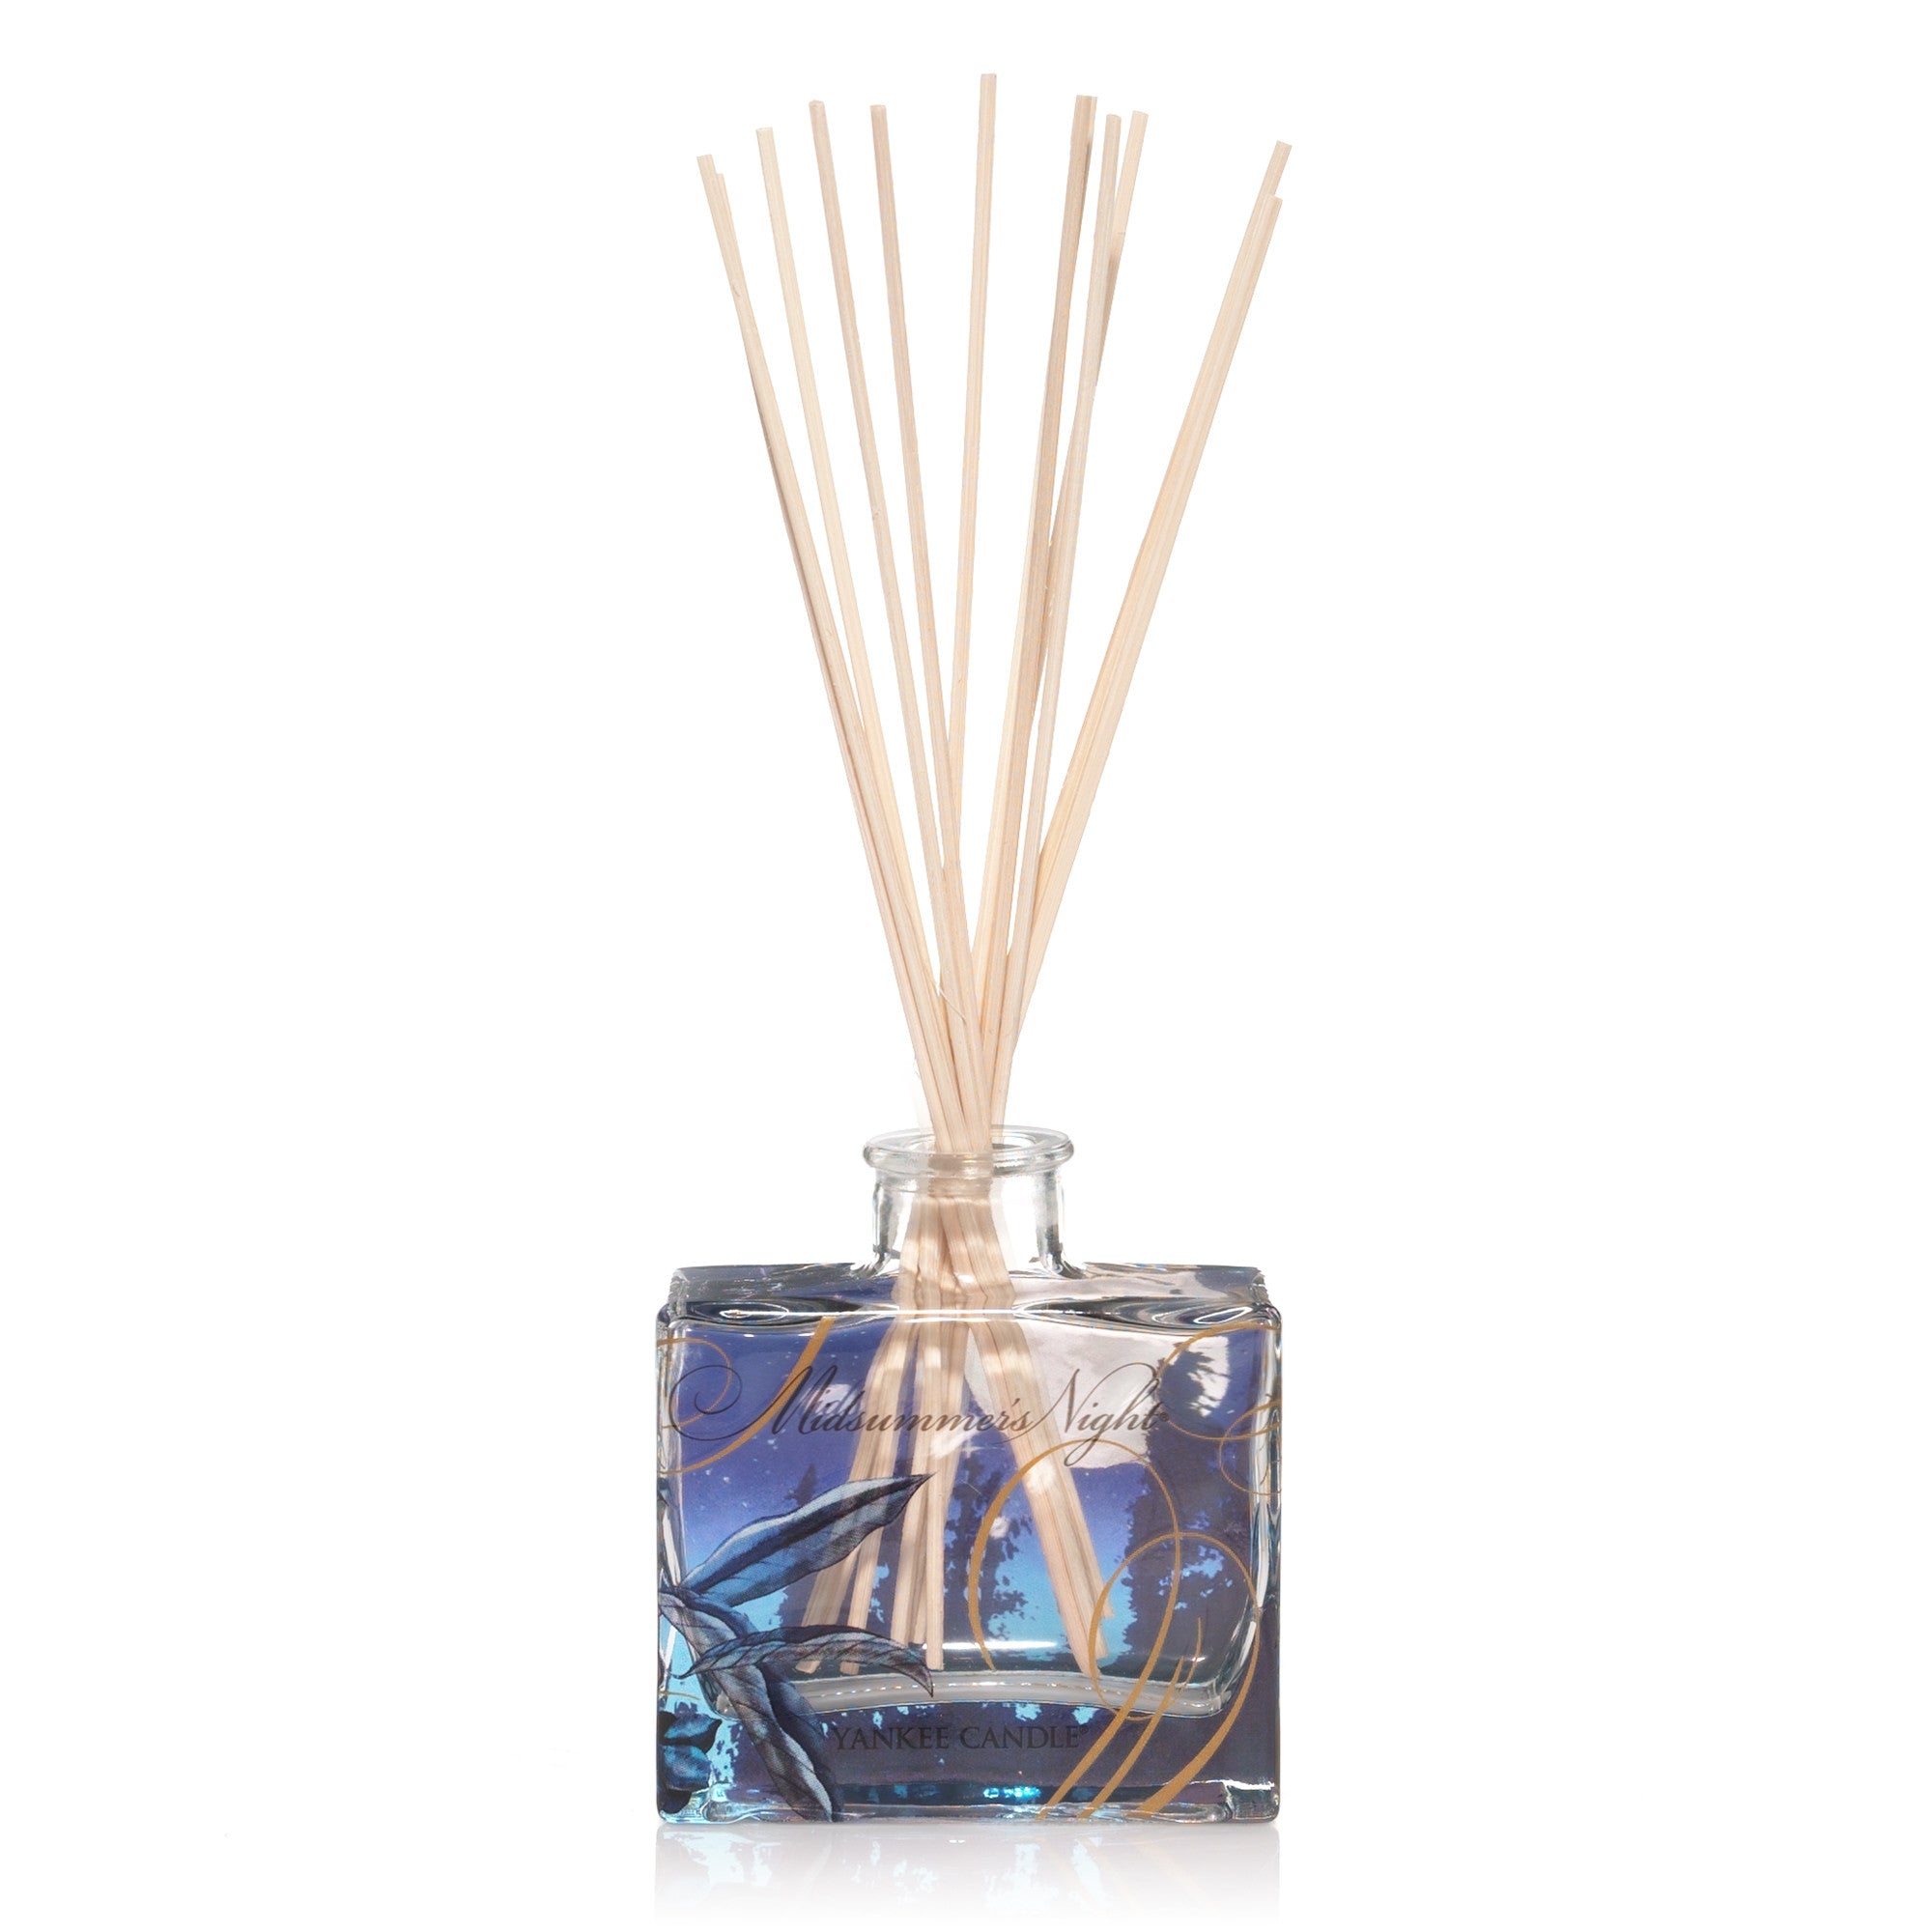 MIDSUMMER'S NIGHT -Yankee Candle- Reed Diffuser